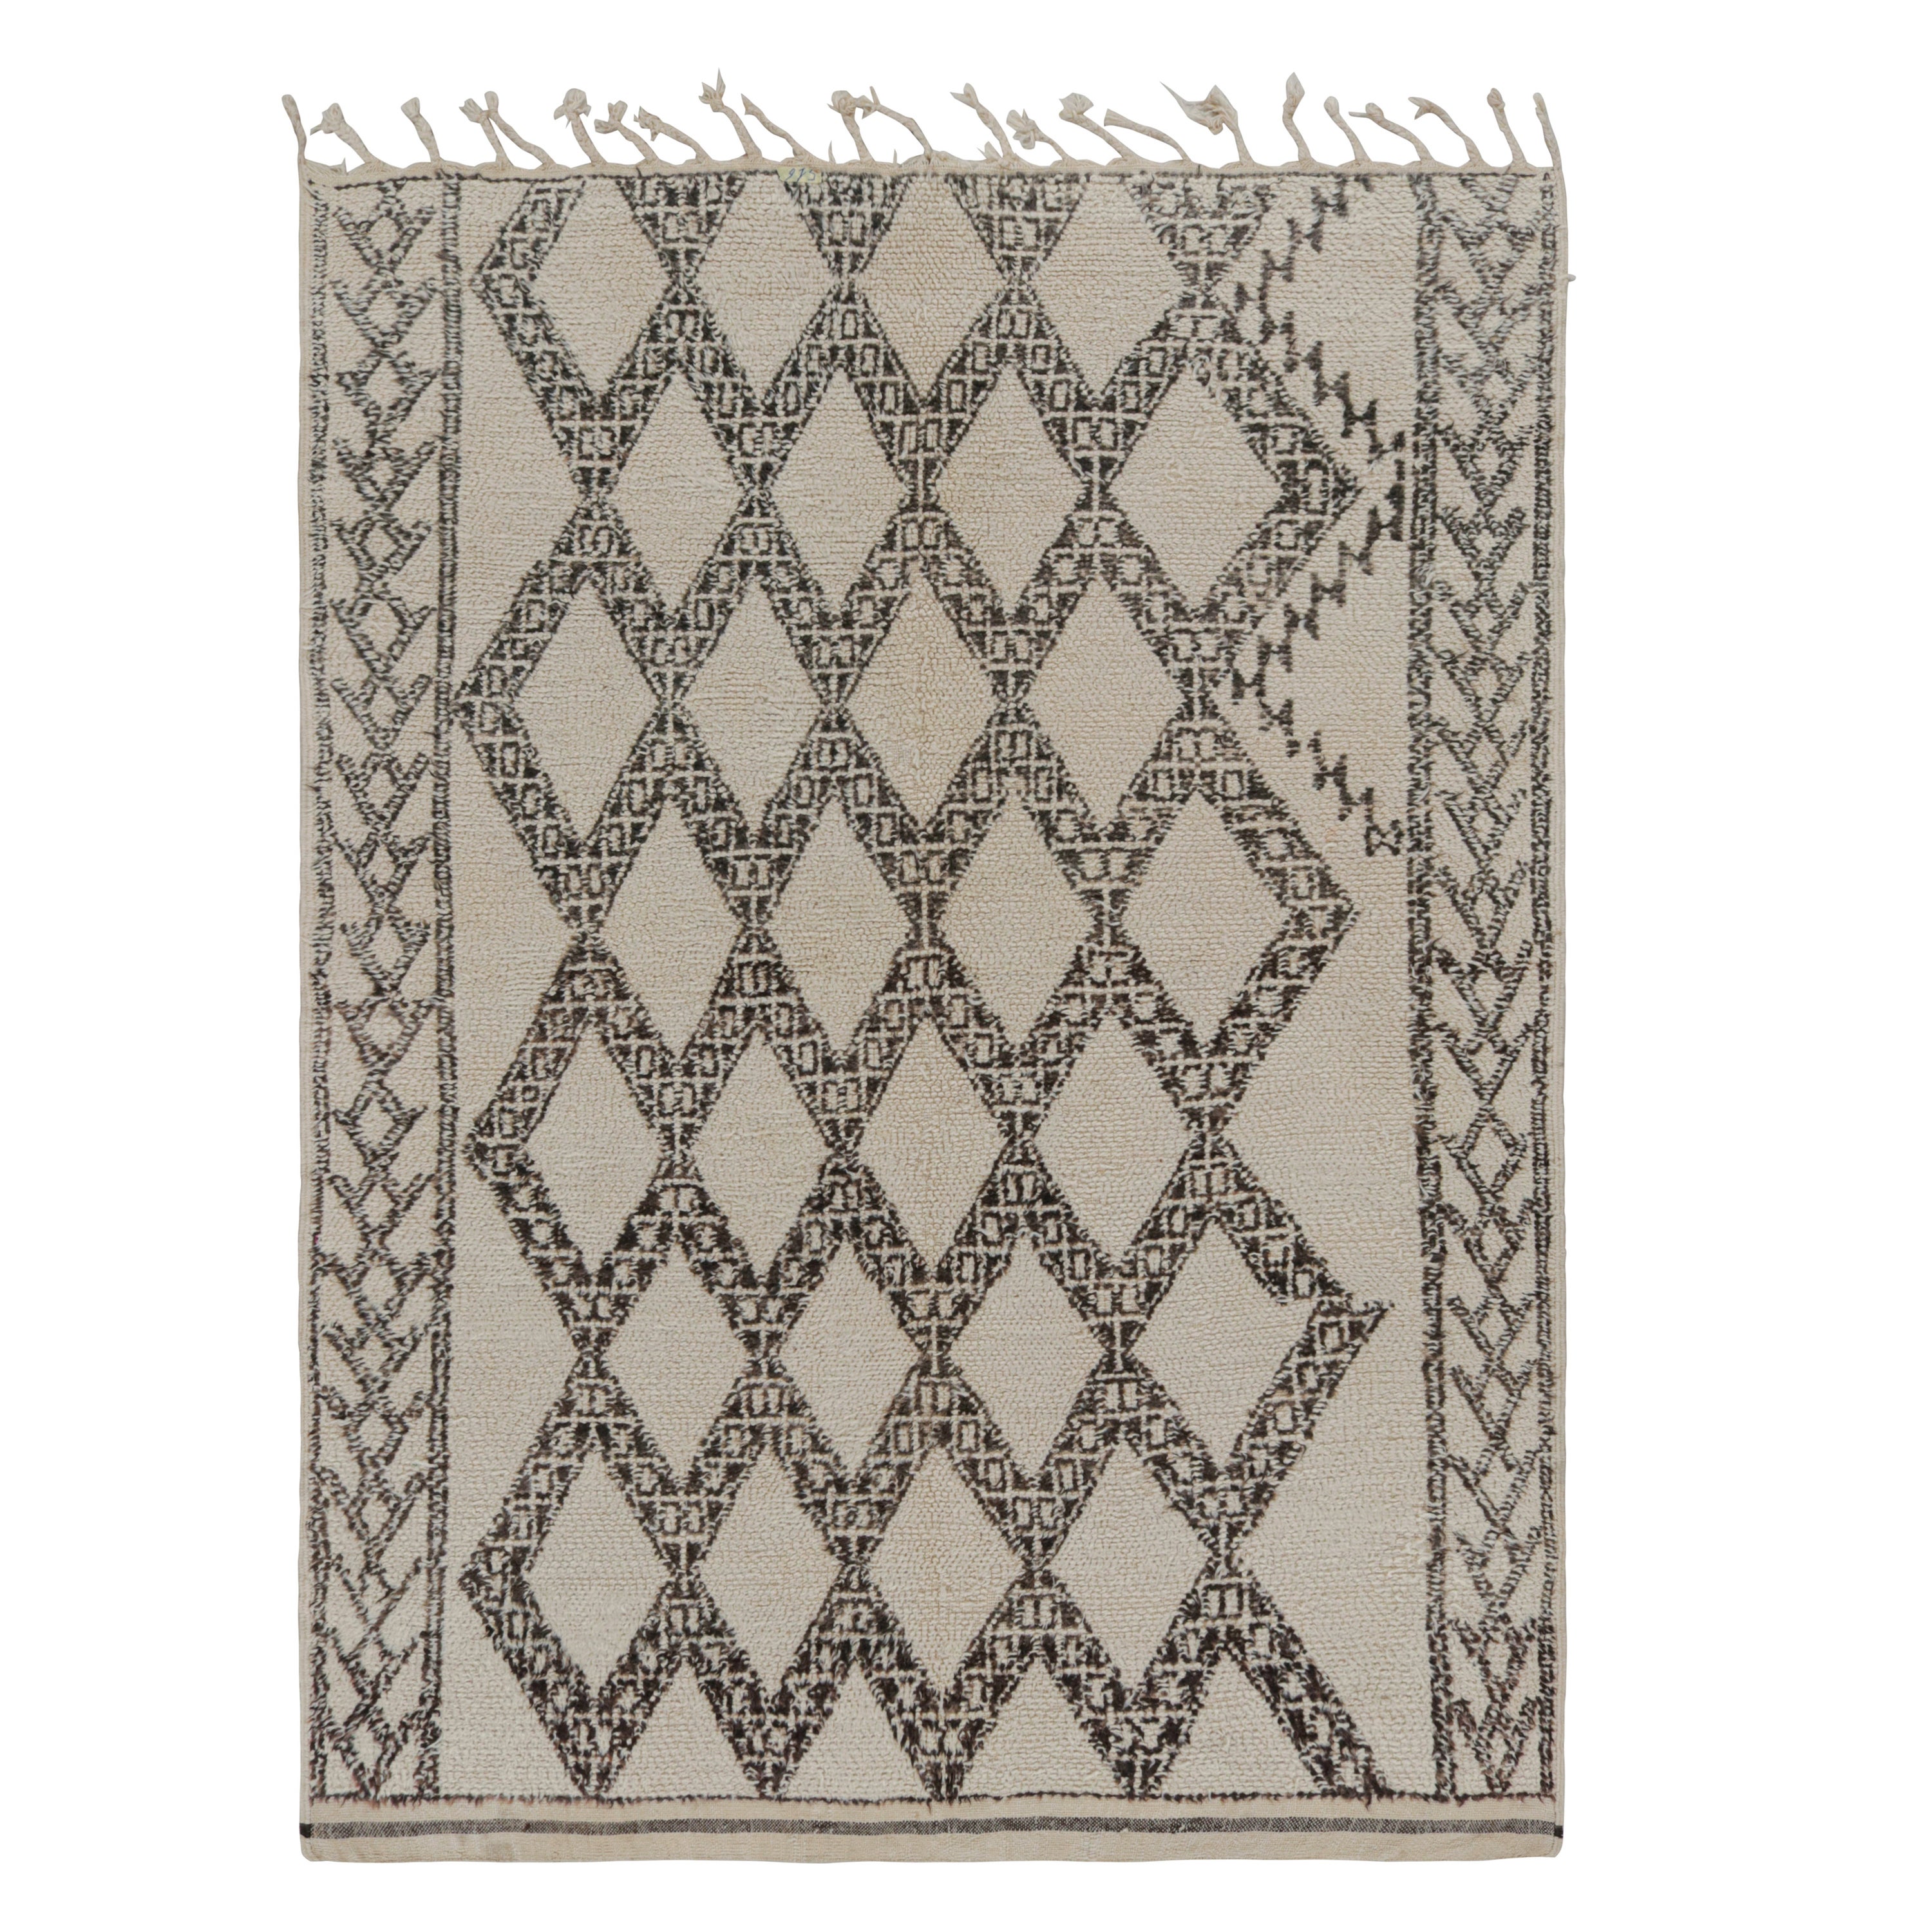 Vintage Azilal Moroccan rug with White and Beige-Brown Patterns by Rug & Kilim For Sale